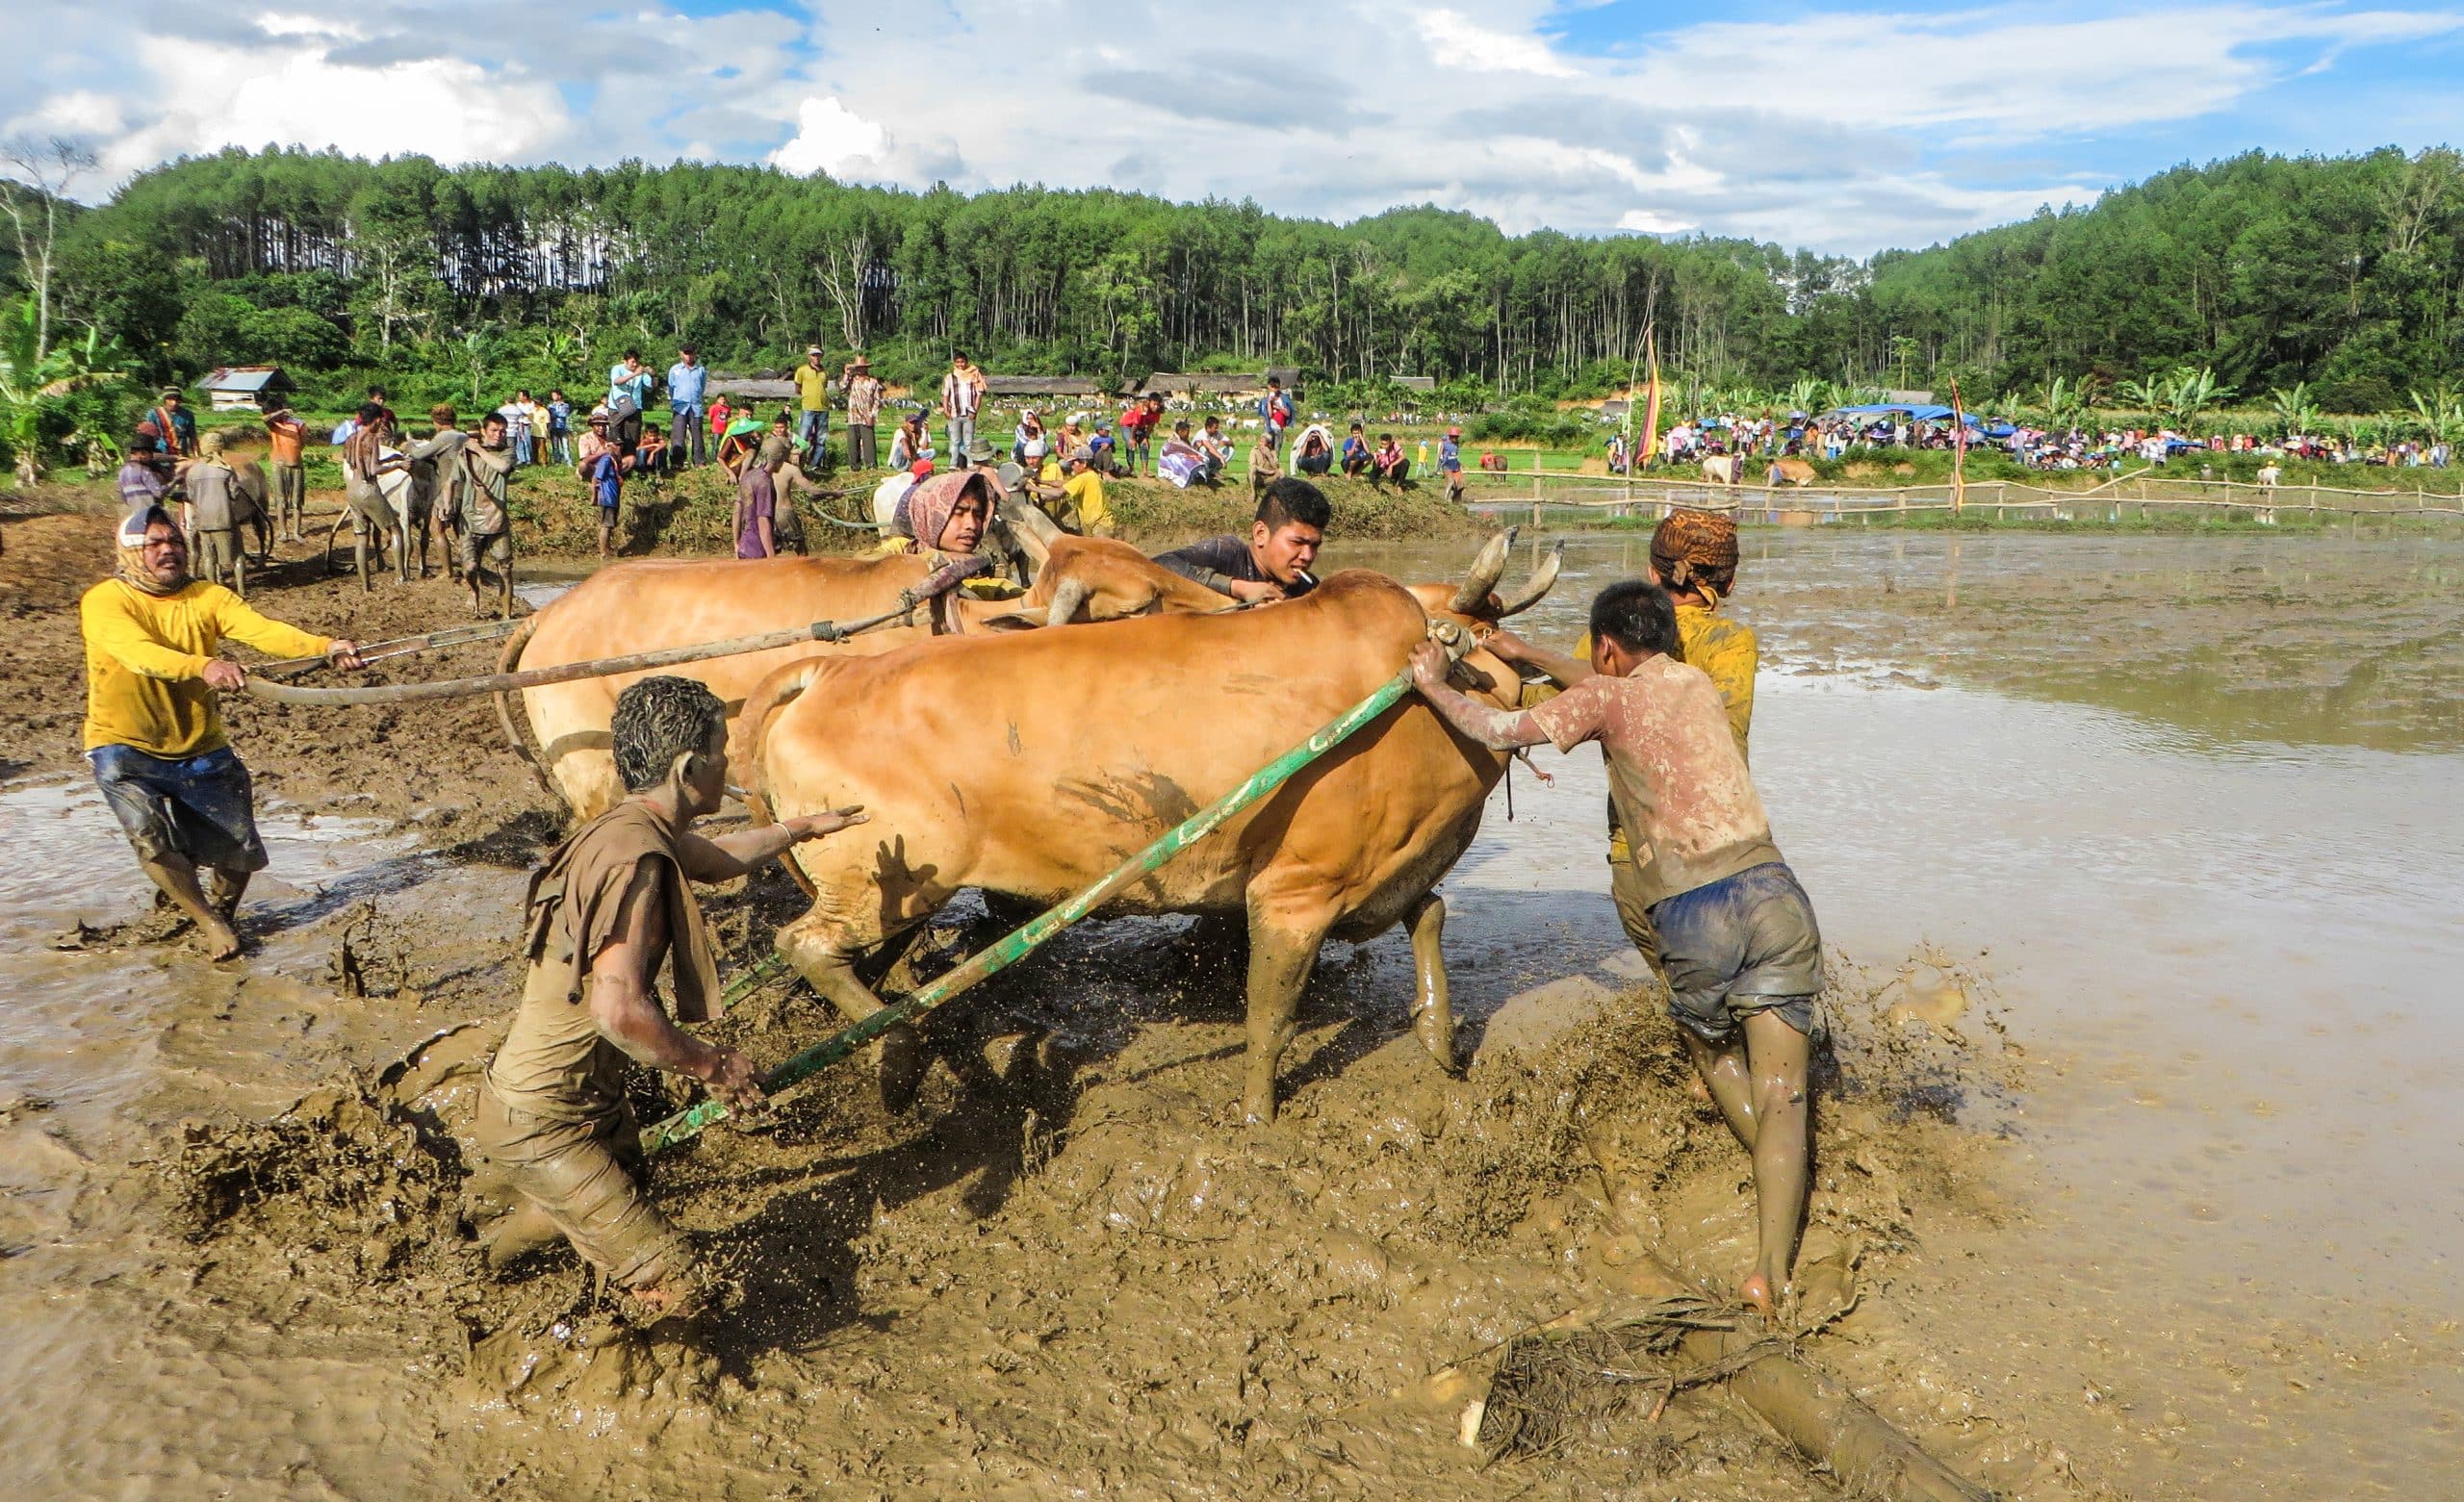 Wrestling with cows - Pacu Jawi, Padang